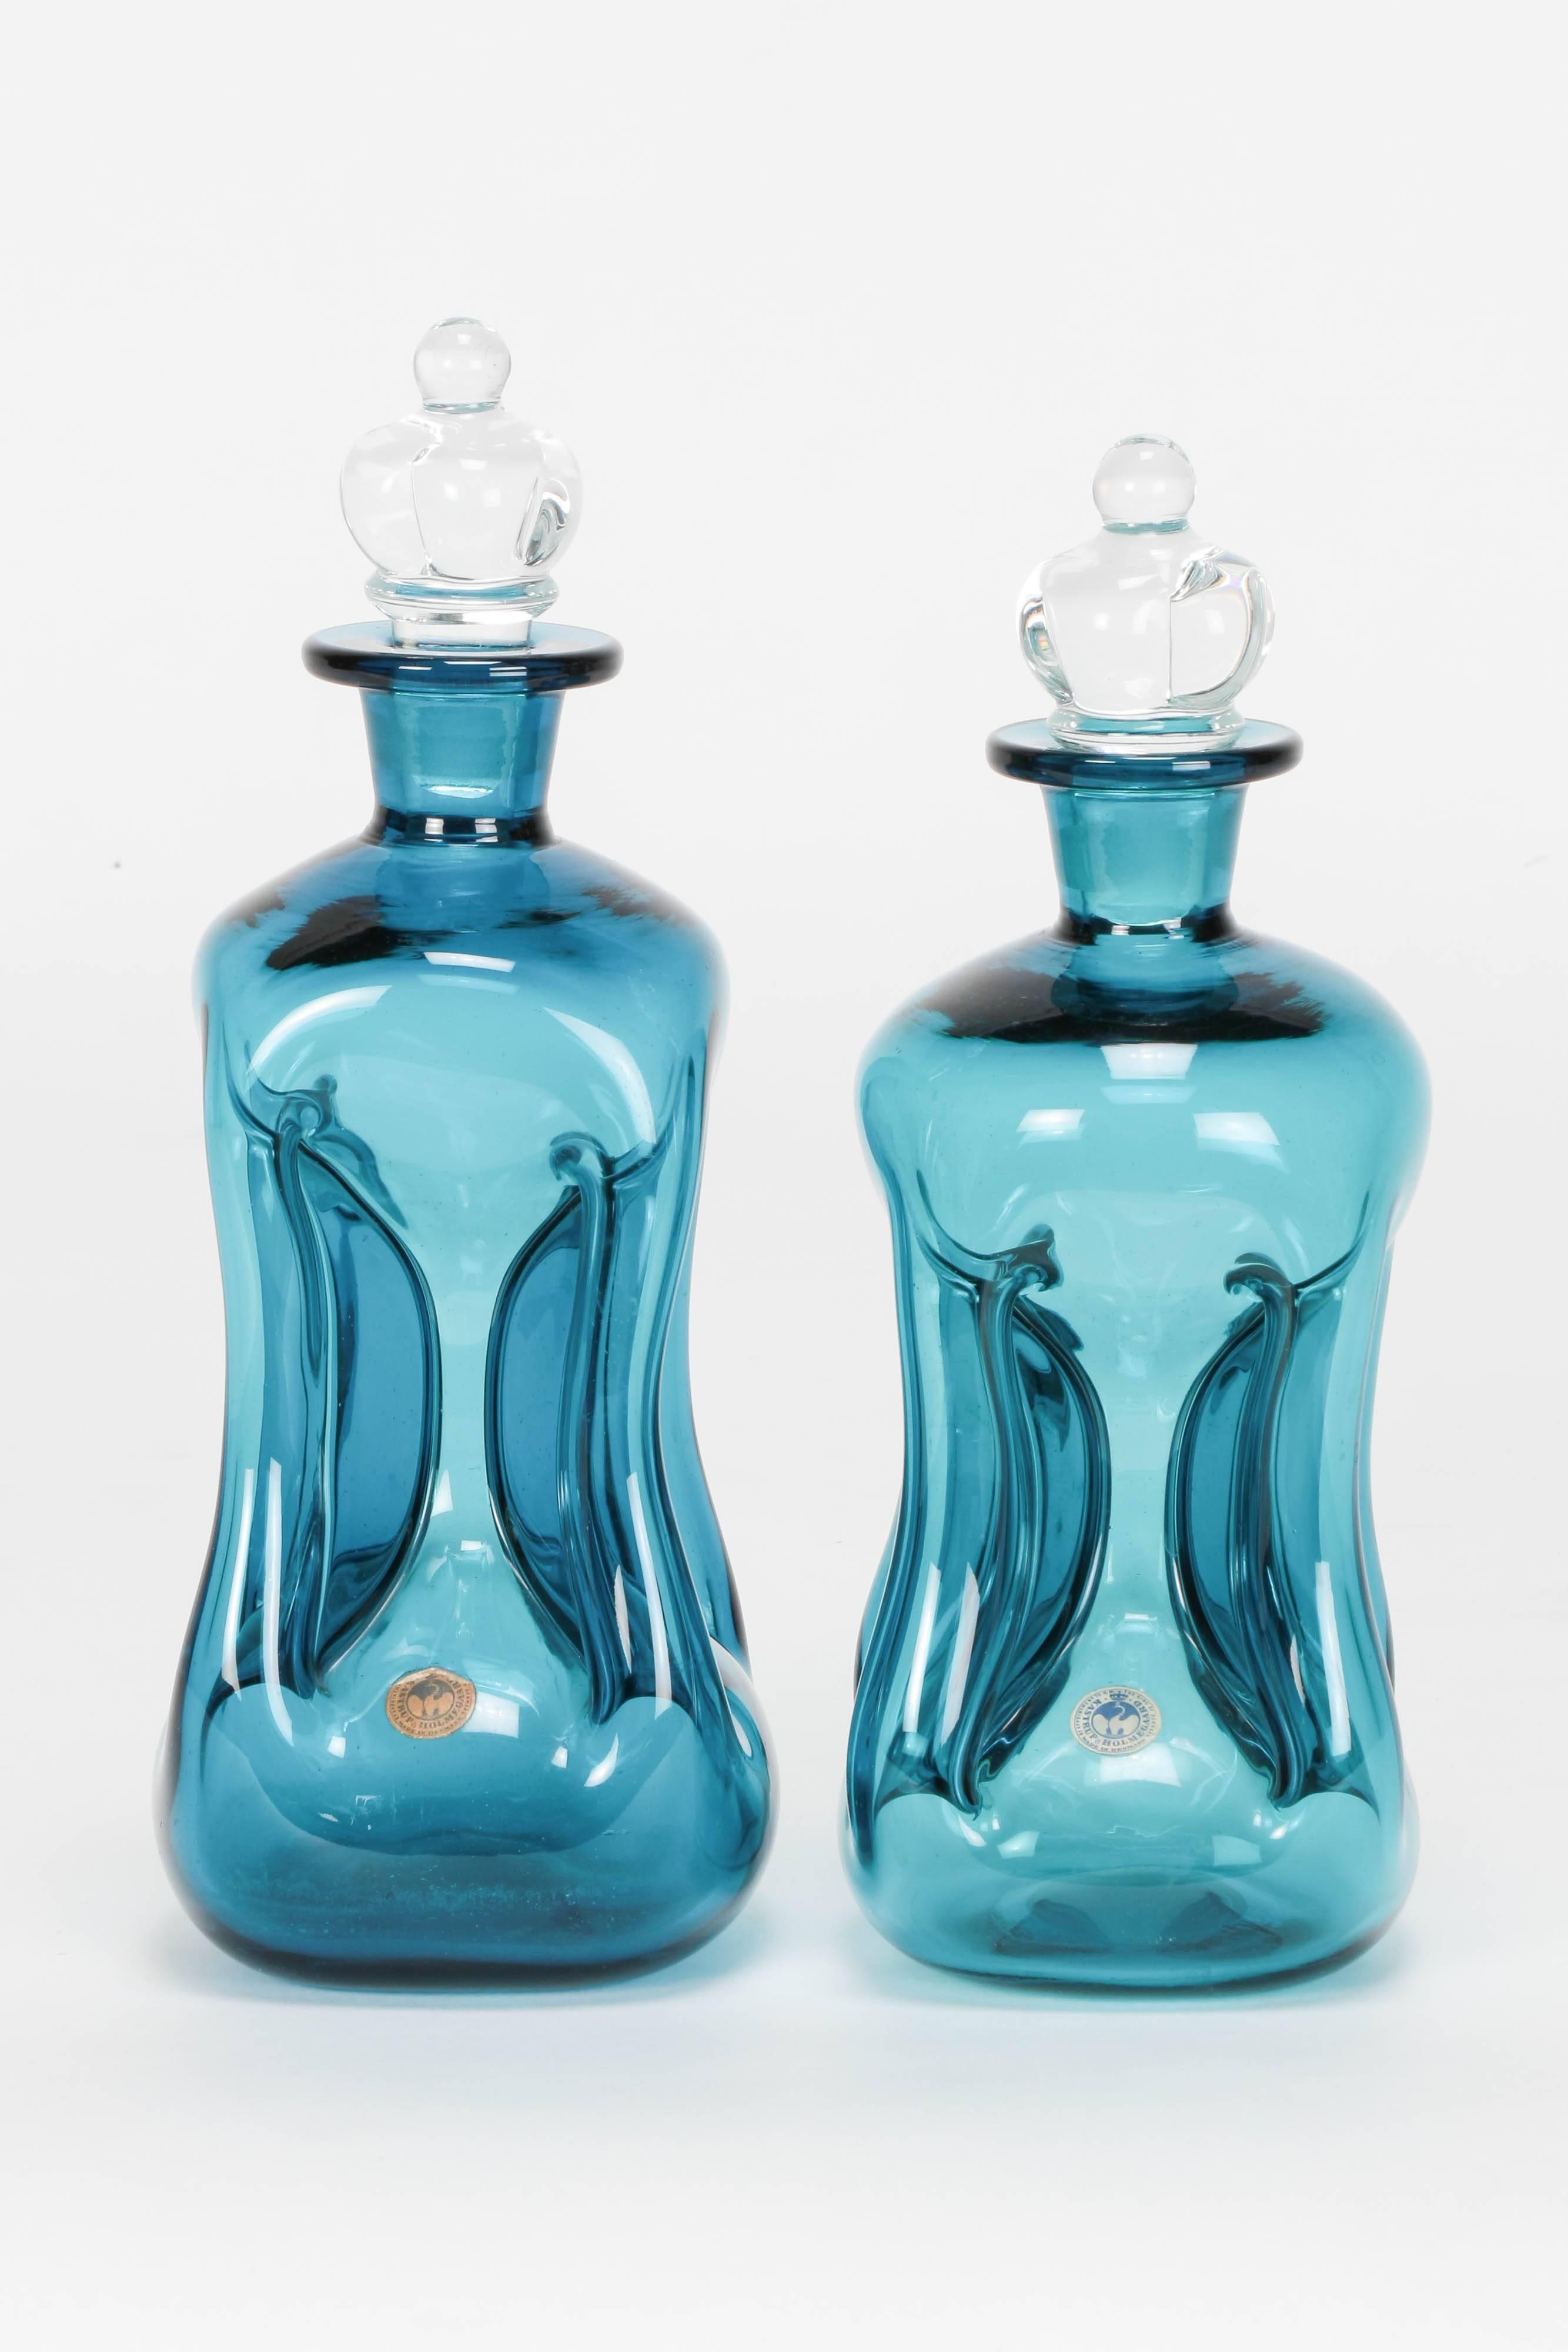 Pair of Jacob E. Bang kluk kluk decanters from the 1960s. The Danish architect designed this turquoise blue mouth-blown decanter made of crystal glass for the glass manufacturer Holmegaard-Kastrup. The stopper is made of clear glass. The vessels are